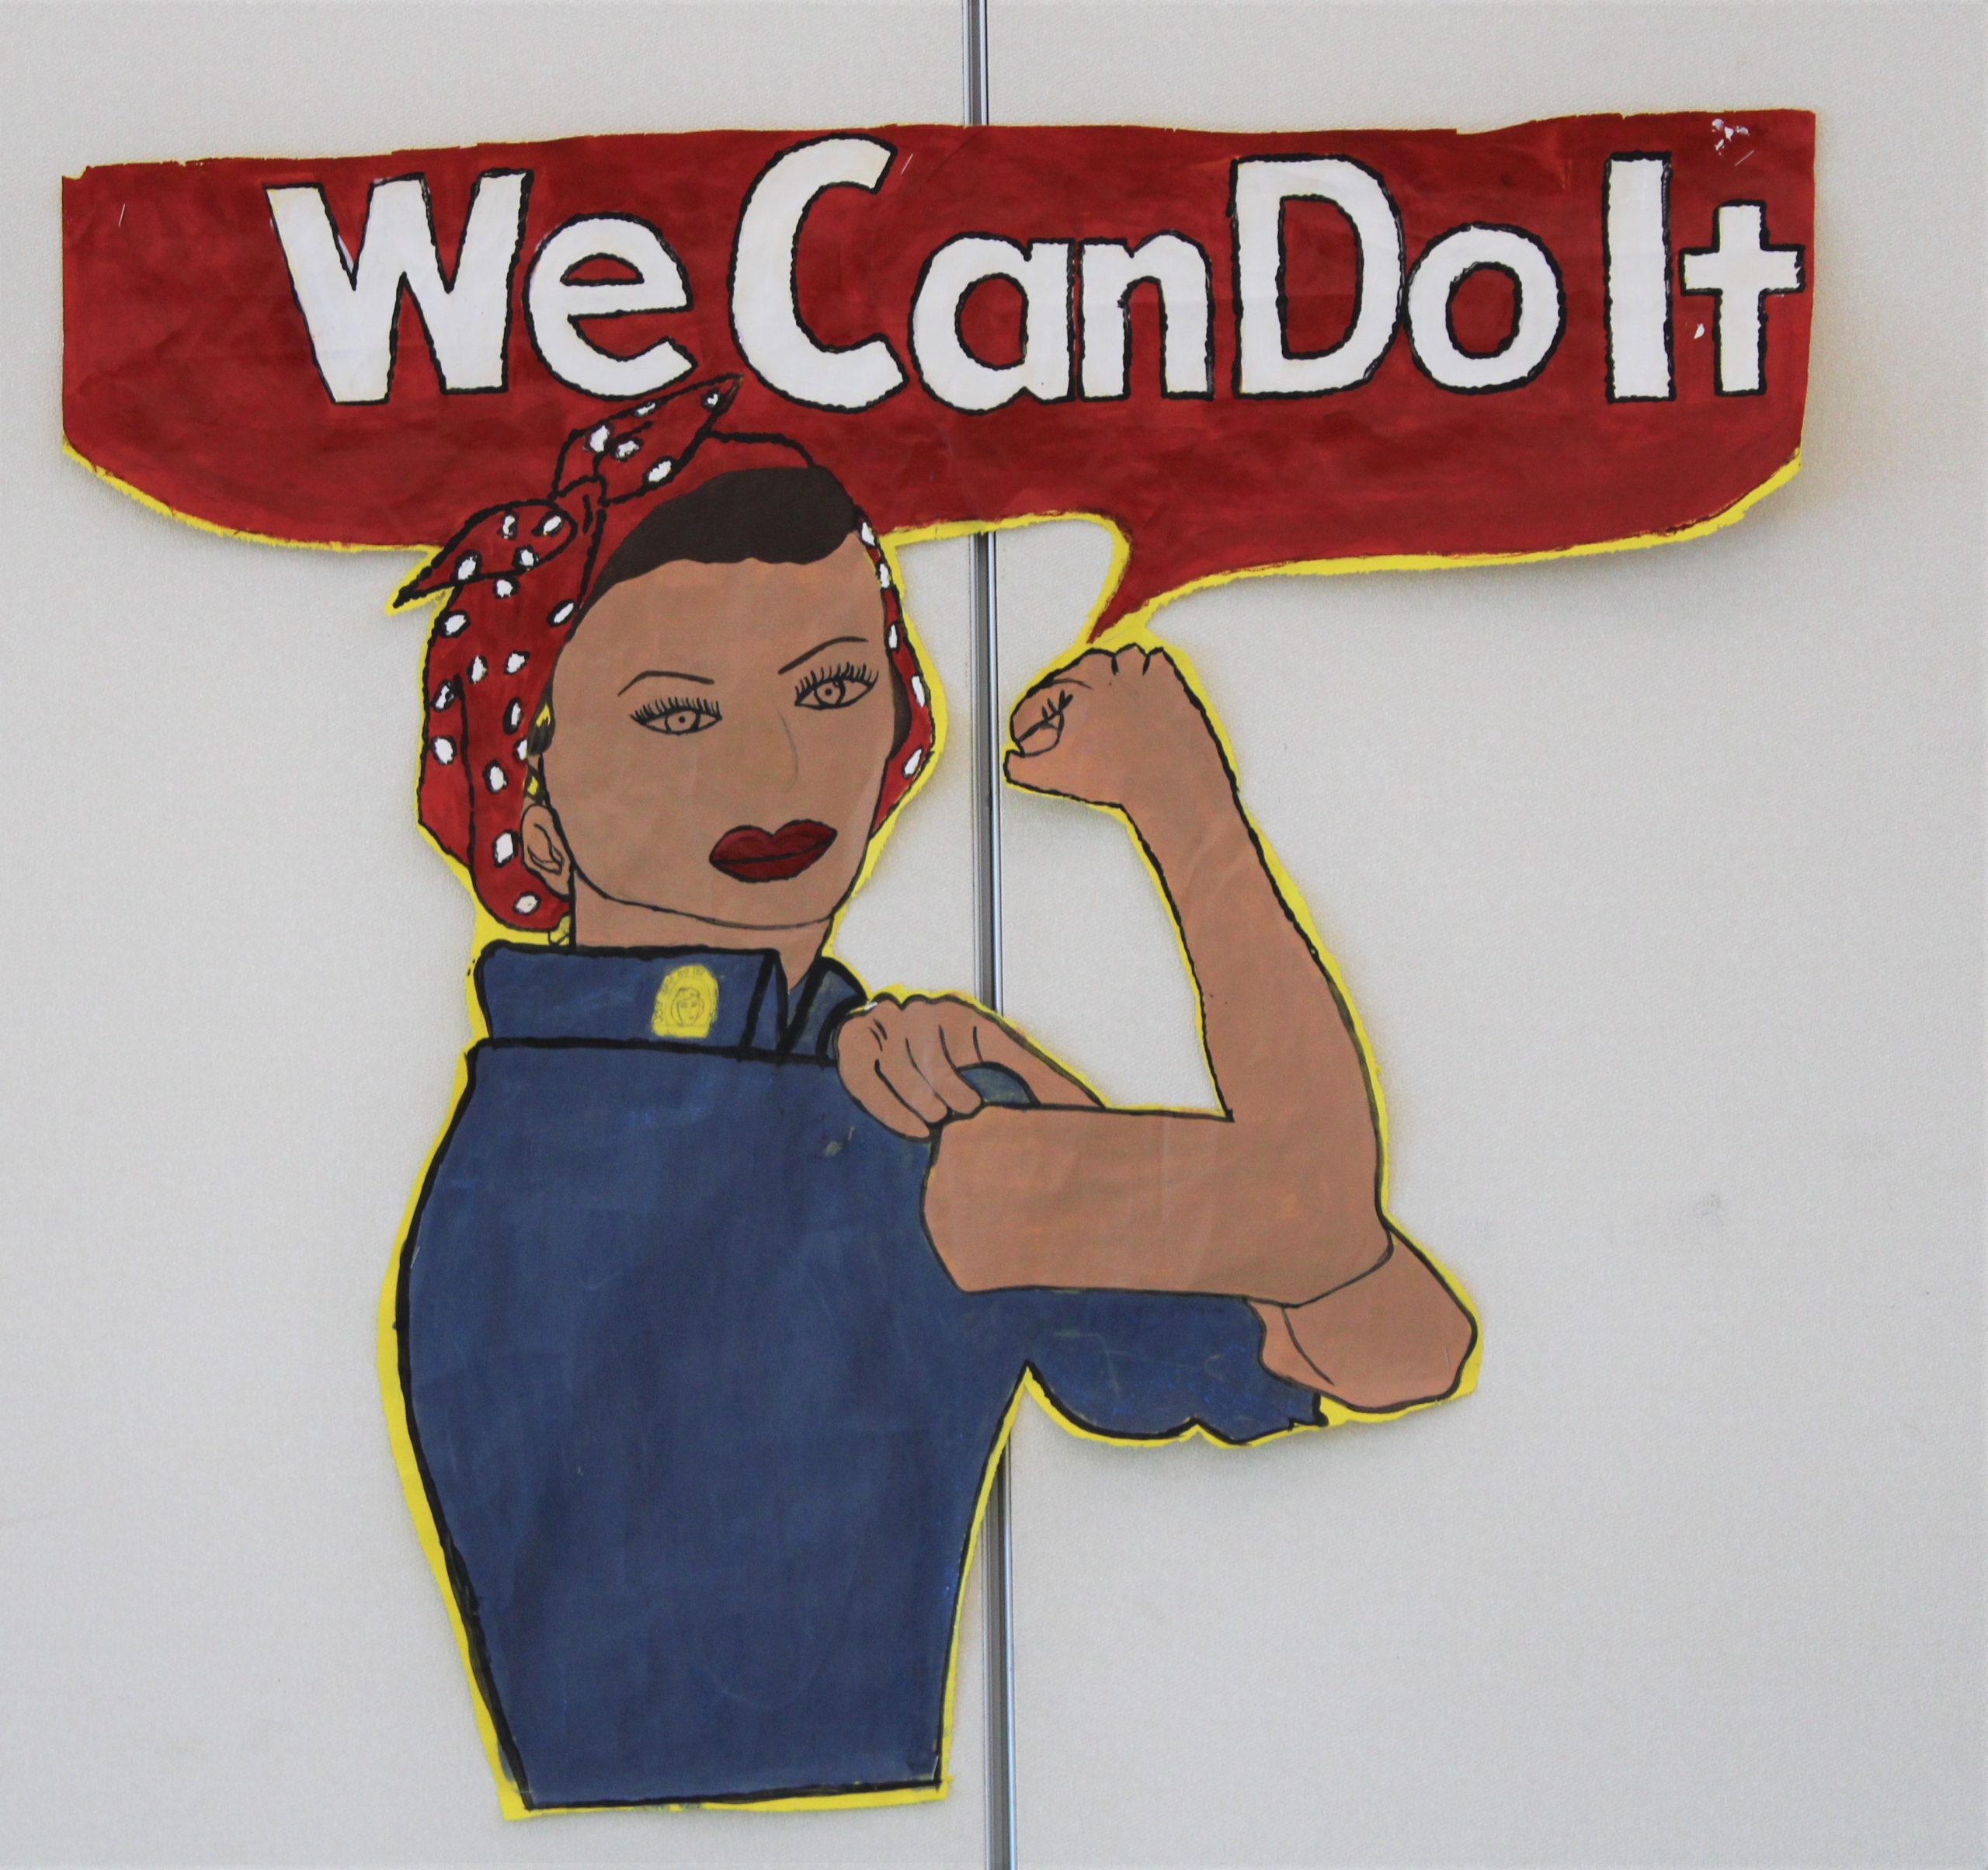 We Can Do It artwork.